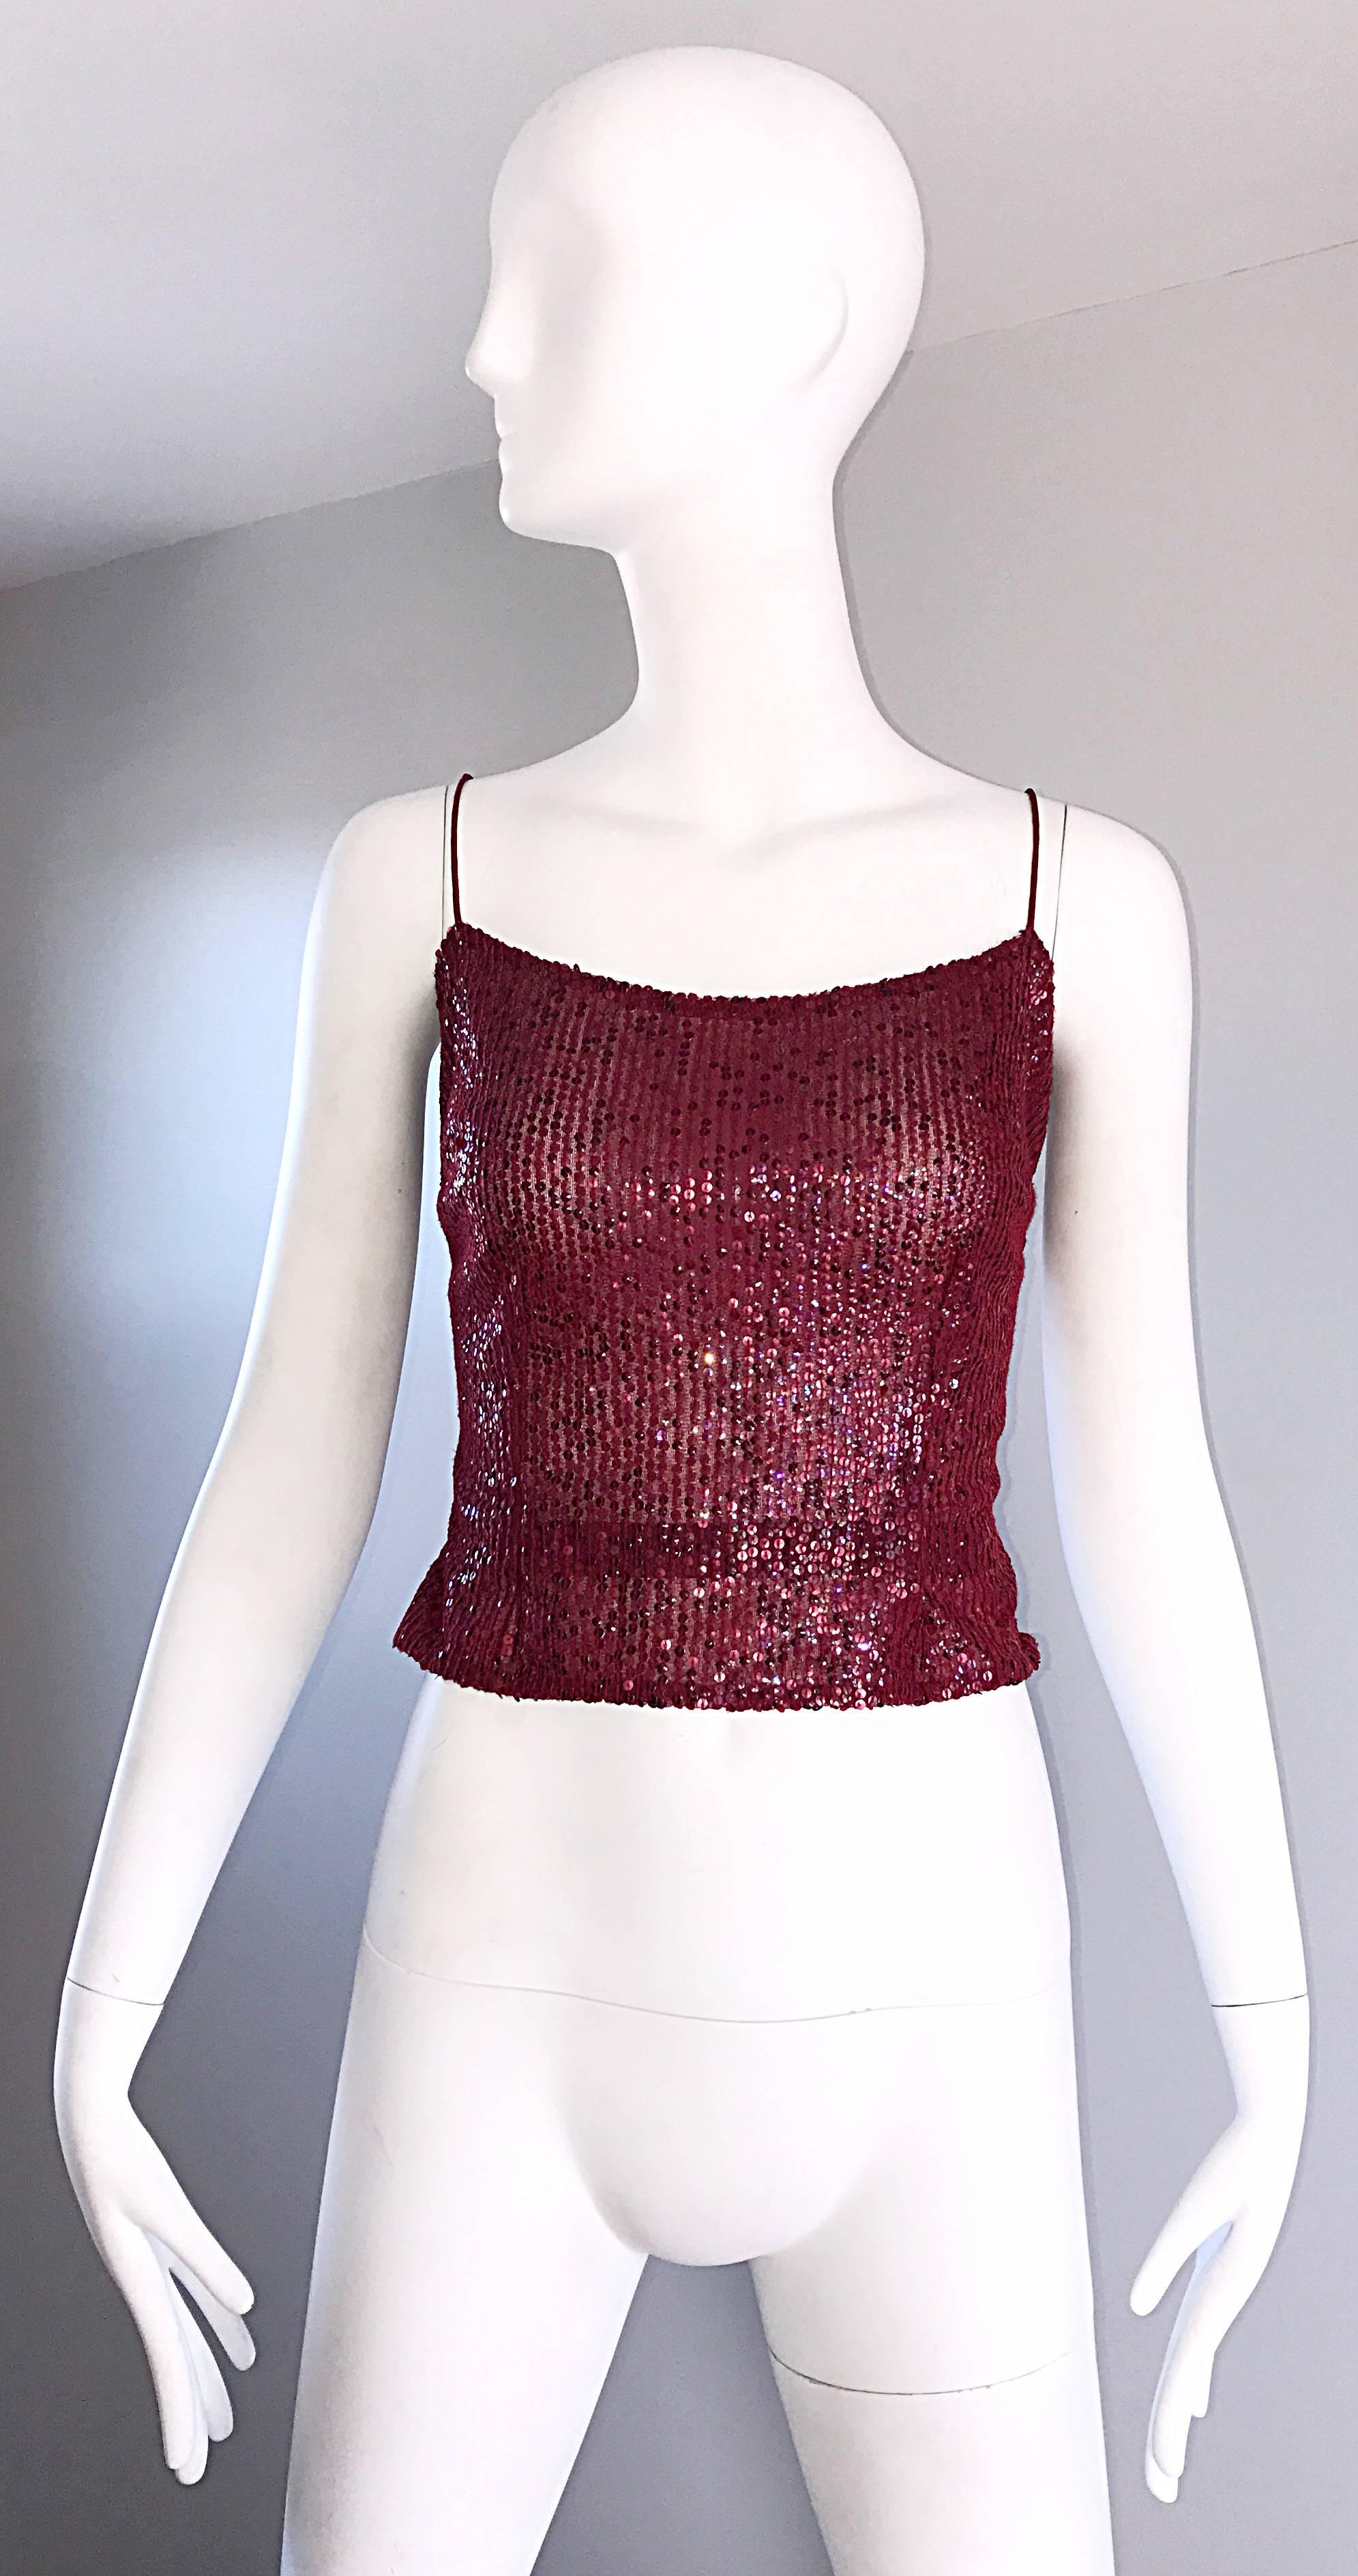 Beautiful vintage LIANCARLO red/wine colored sequined sleeveless top. Features thousands of hand-sewn sequins throughout. Built in interior support holds everything in place. Hidden zipper up the side. Couture quality, with amazing attention to